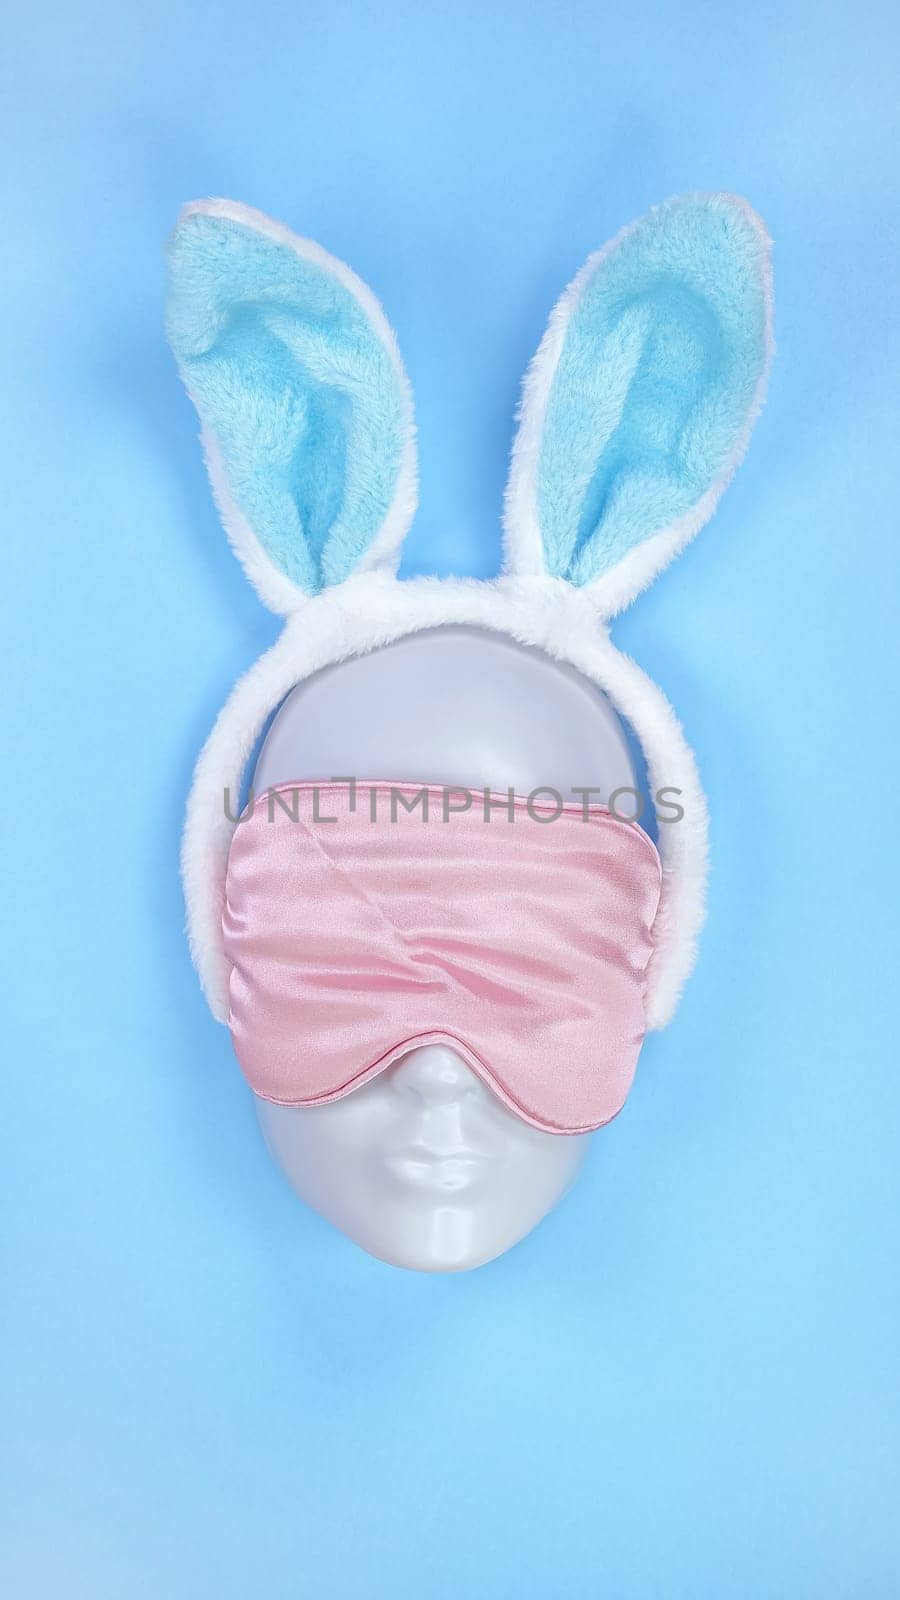 Pink sleeping eye mask on mannequin face with blue fluffy Easter bunny ears on blue background, sleeping disorder. Holidays, Head accessory. Plastic face. by JuliaDorian